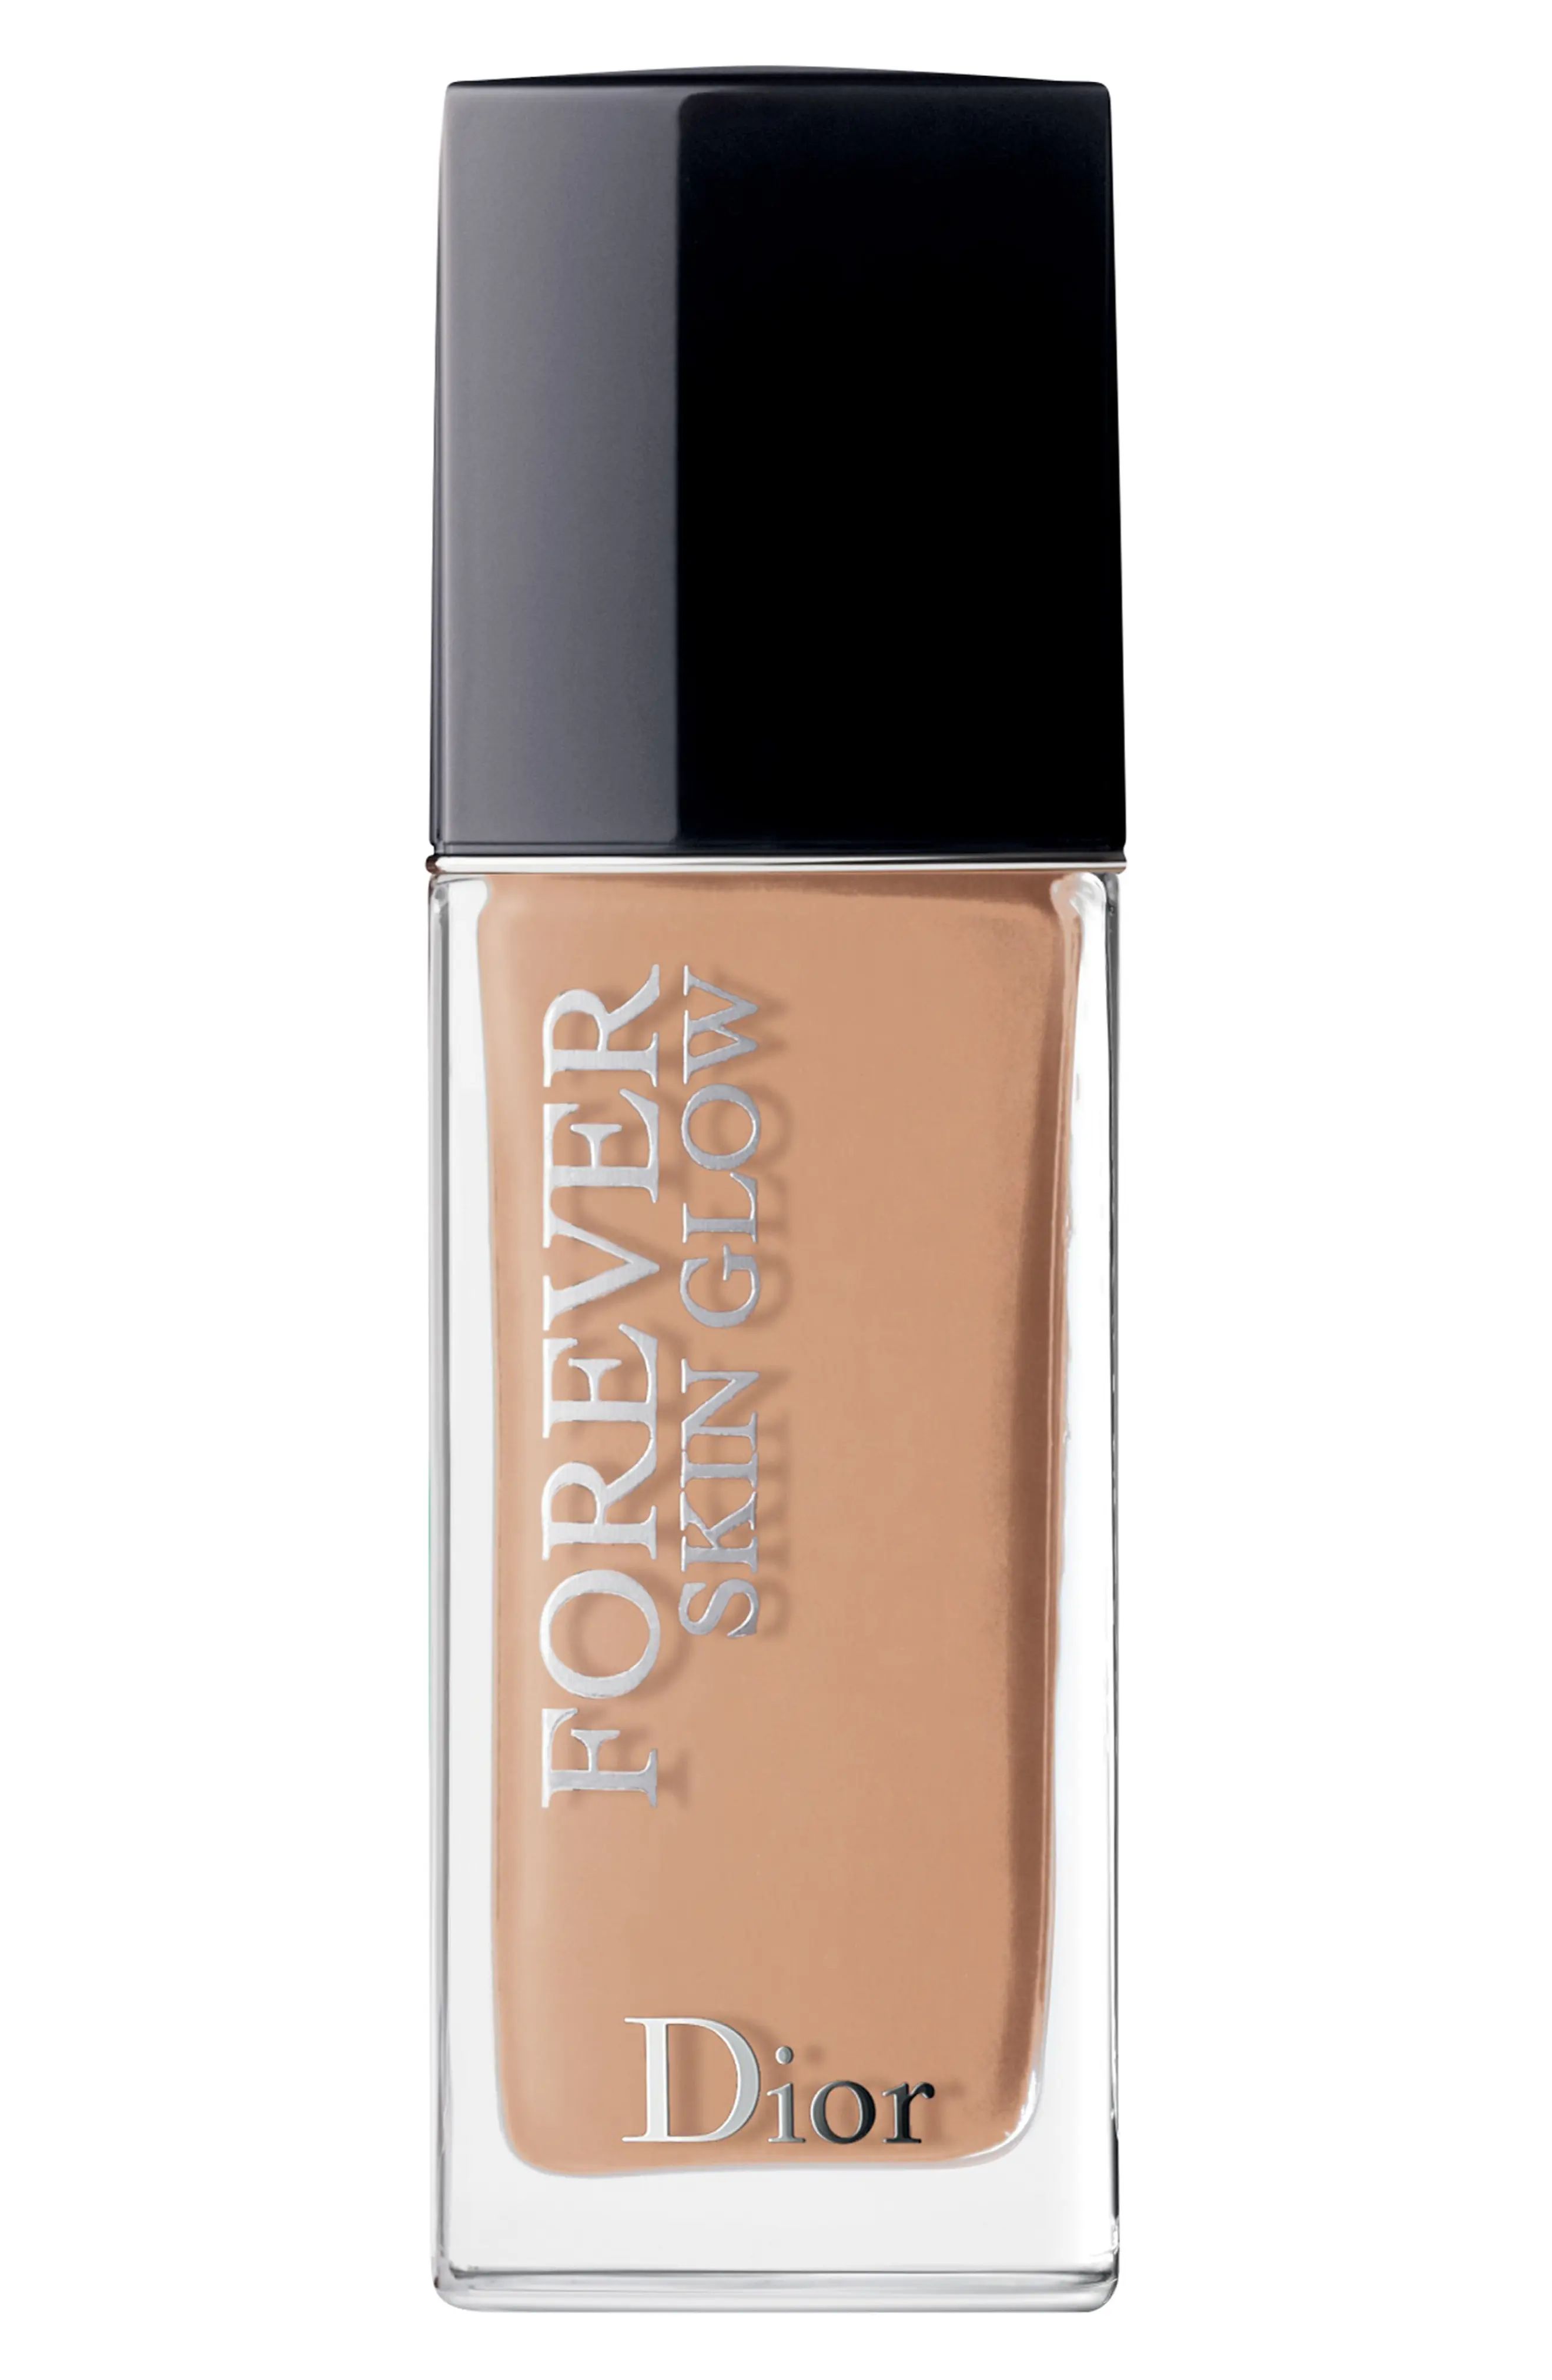 Dior Forever Skin Glow Radiant Perfection Skin-Caring Foundation Spf 35 - 3 Neutral | Nordstrom